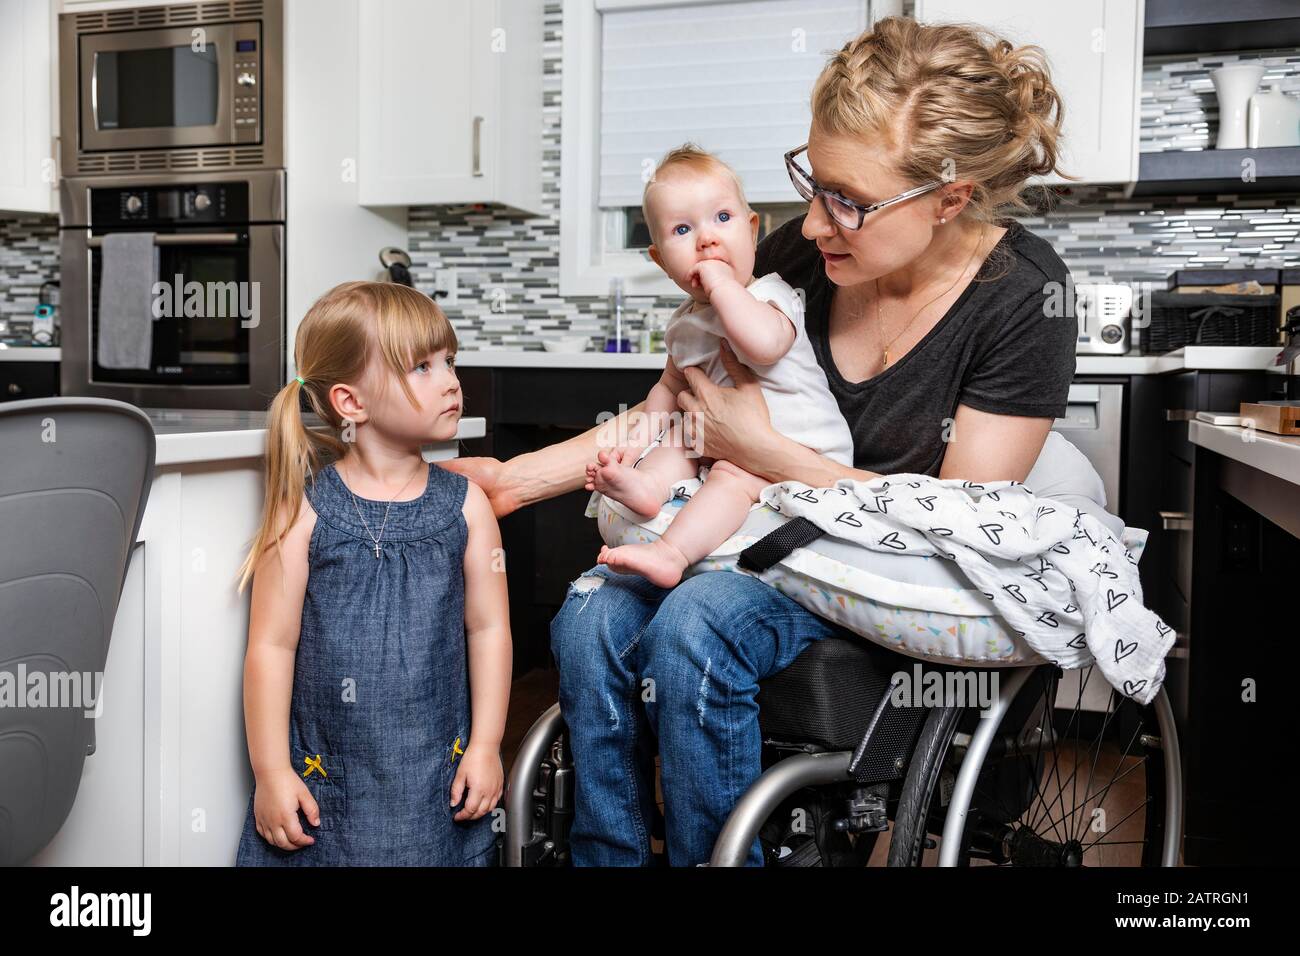 https://c8.alamy.com/comp/2ATRGN1/a-paraplegic-mom-in-a-wheelchair-talking-with-her-daughter-and-holding-her-baby-in-her-lap-while-working-in-her-kitchen-edmonton-alberta-canada-2ATRGN1.jpg